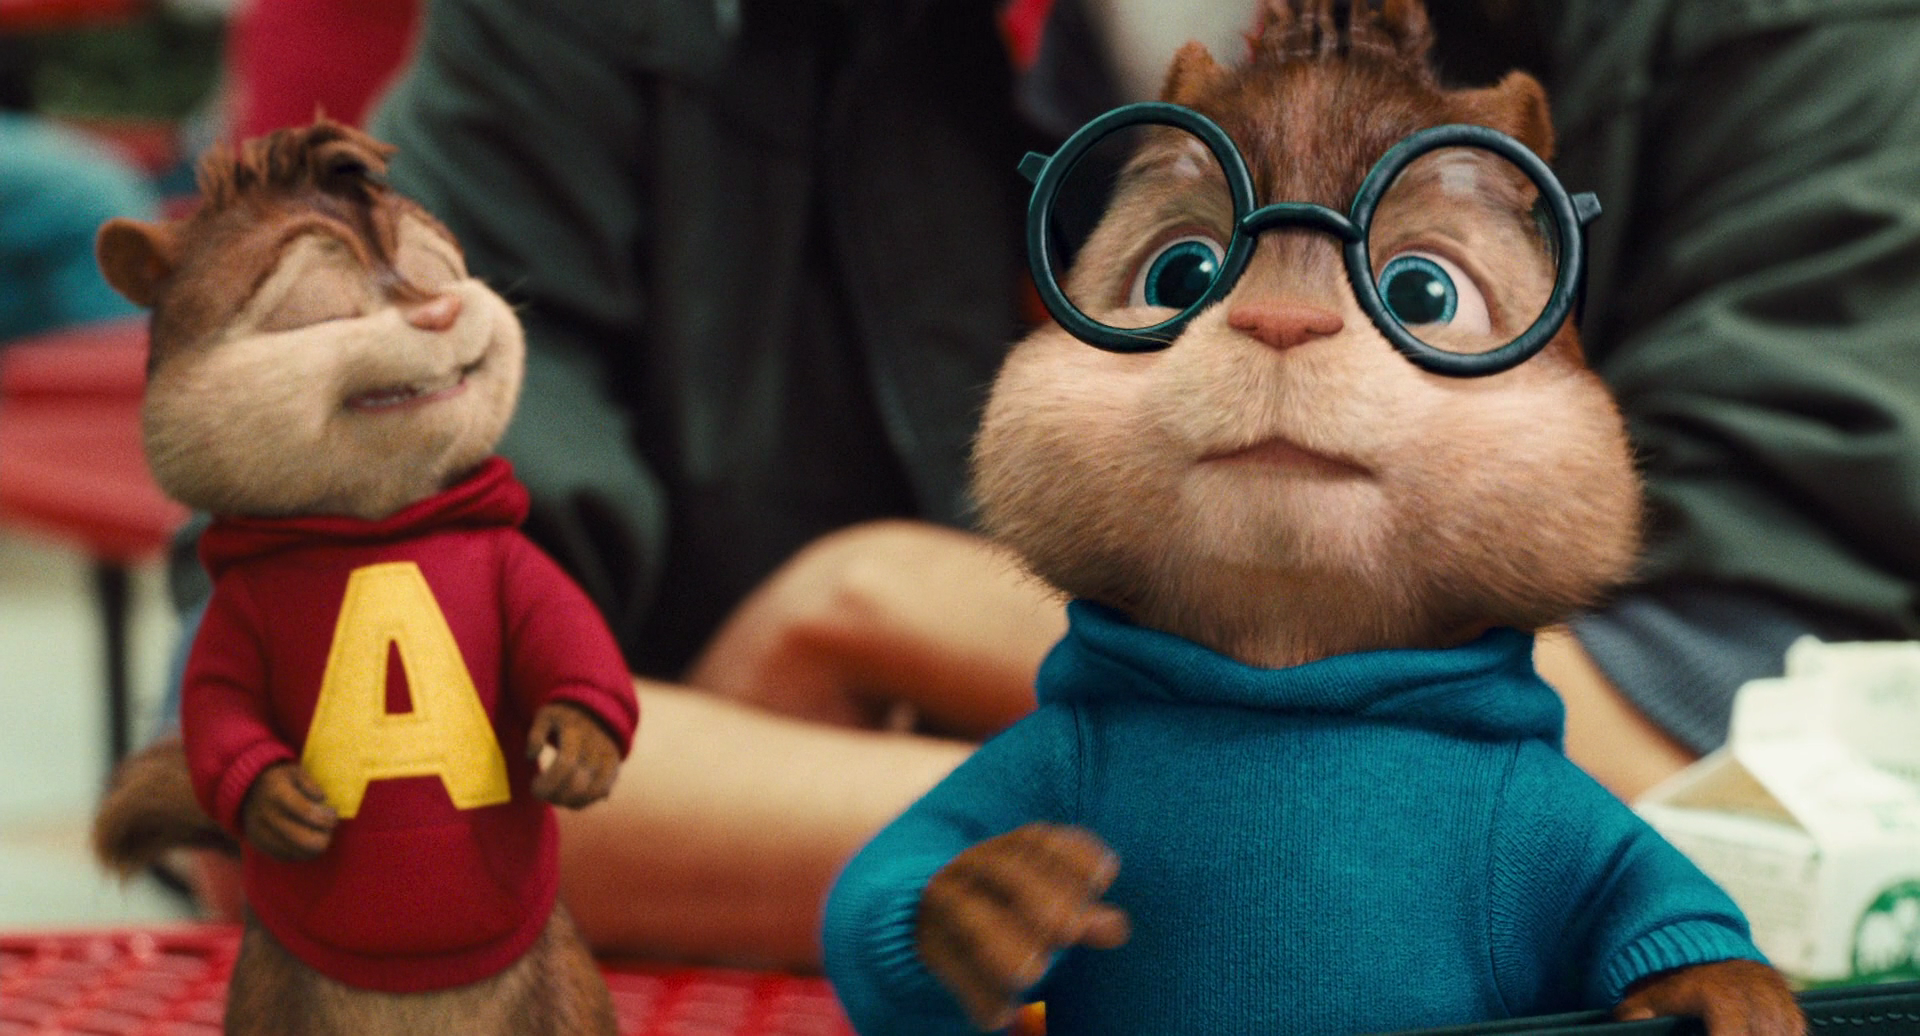 Alvin and the chipmunks puppets